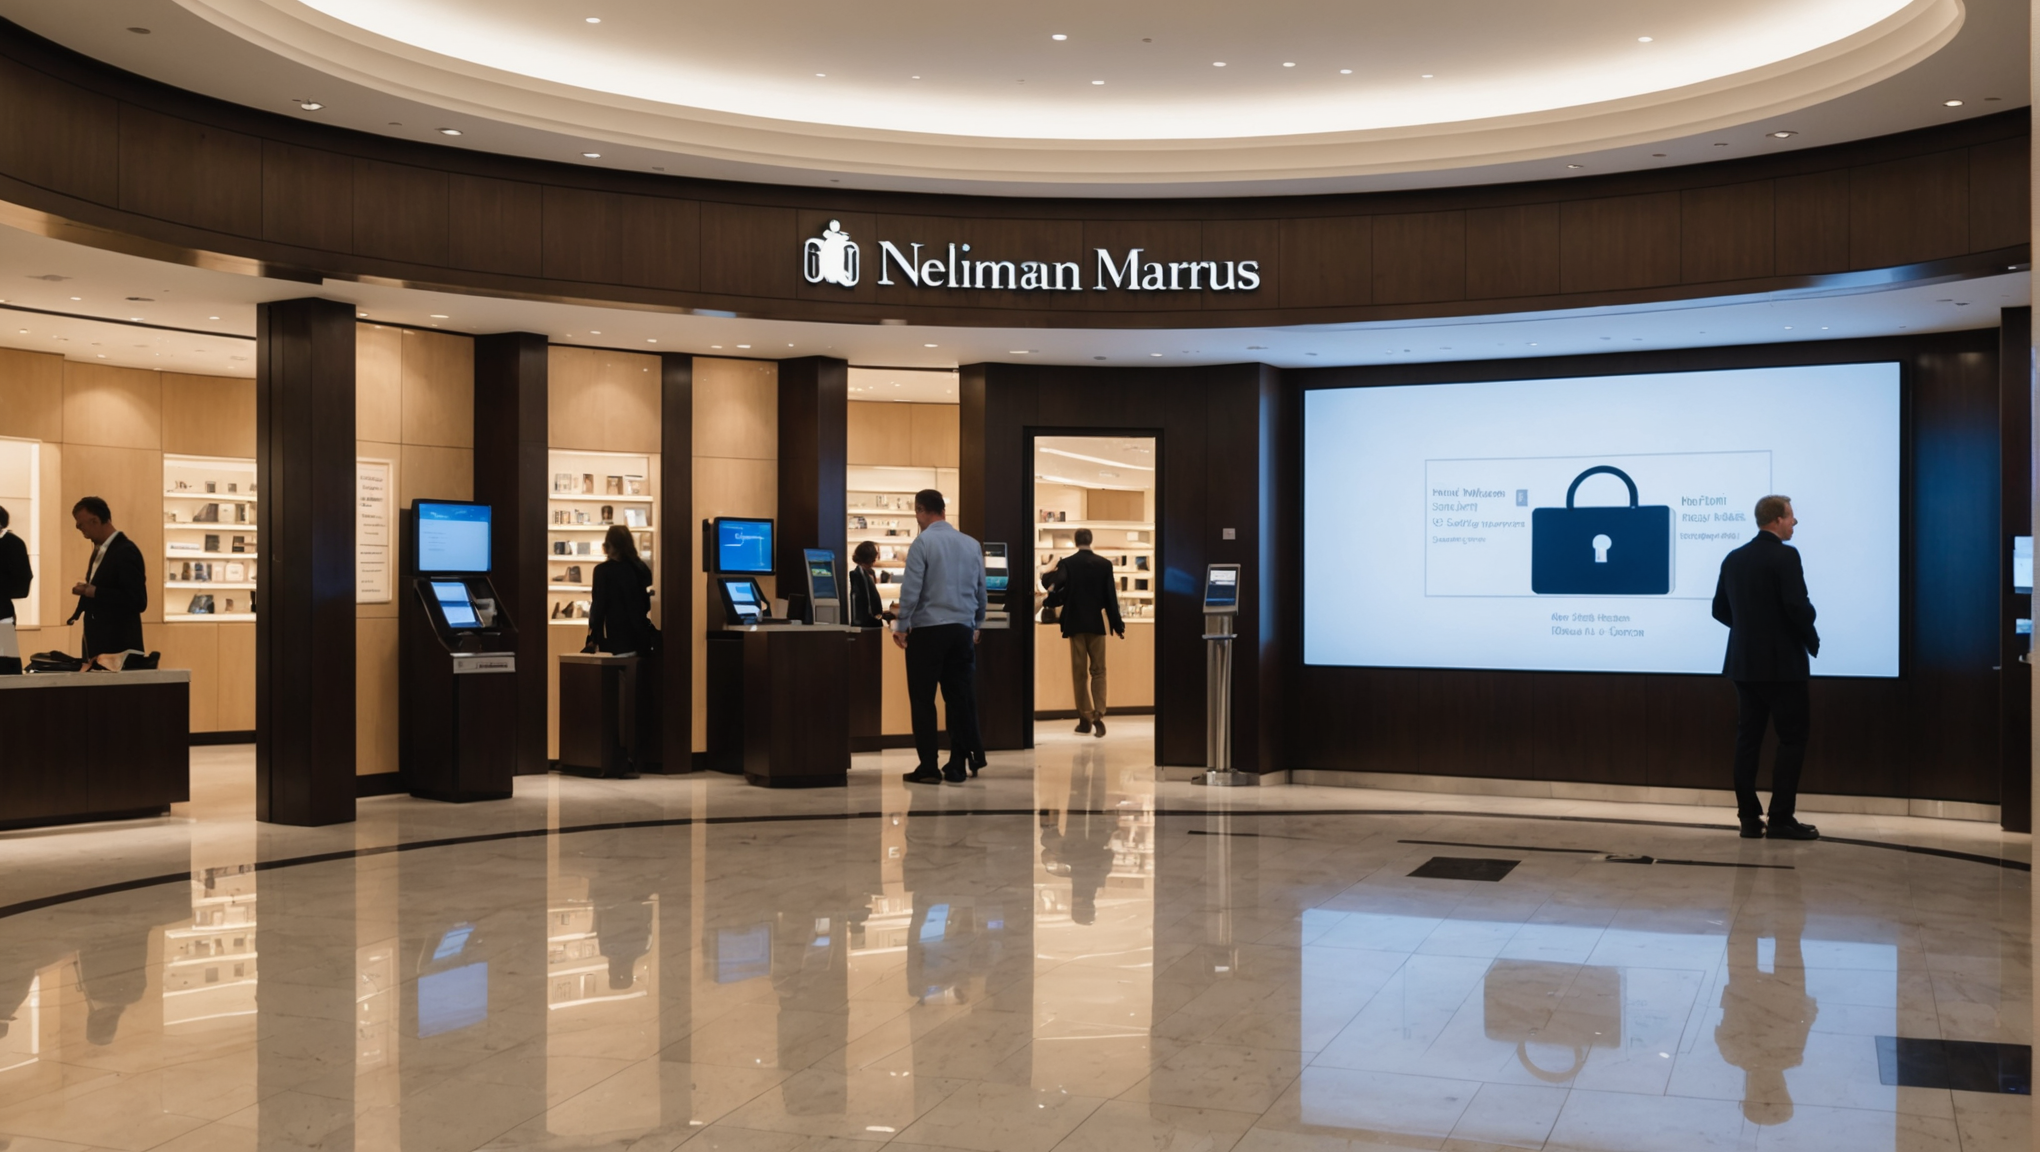 learn about the neiman marcus data breach and fbi crypto scam warning to understand if your personal data is at risk. get the details explained to stay informed and protected.